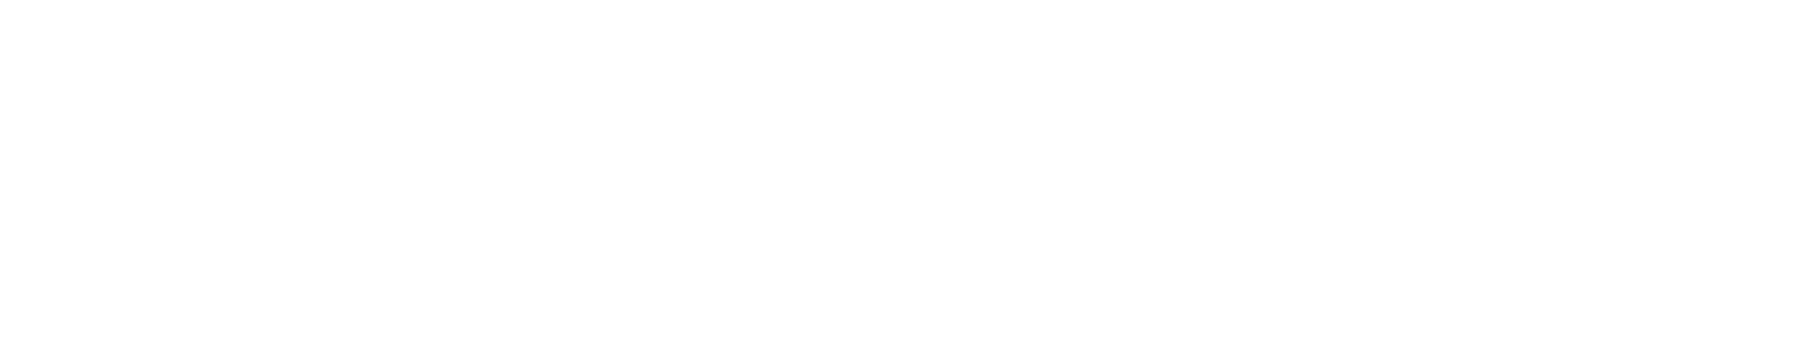 UCI BioSci Office of Diversity, Equity and Inclusion